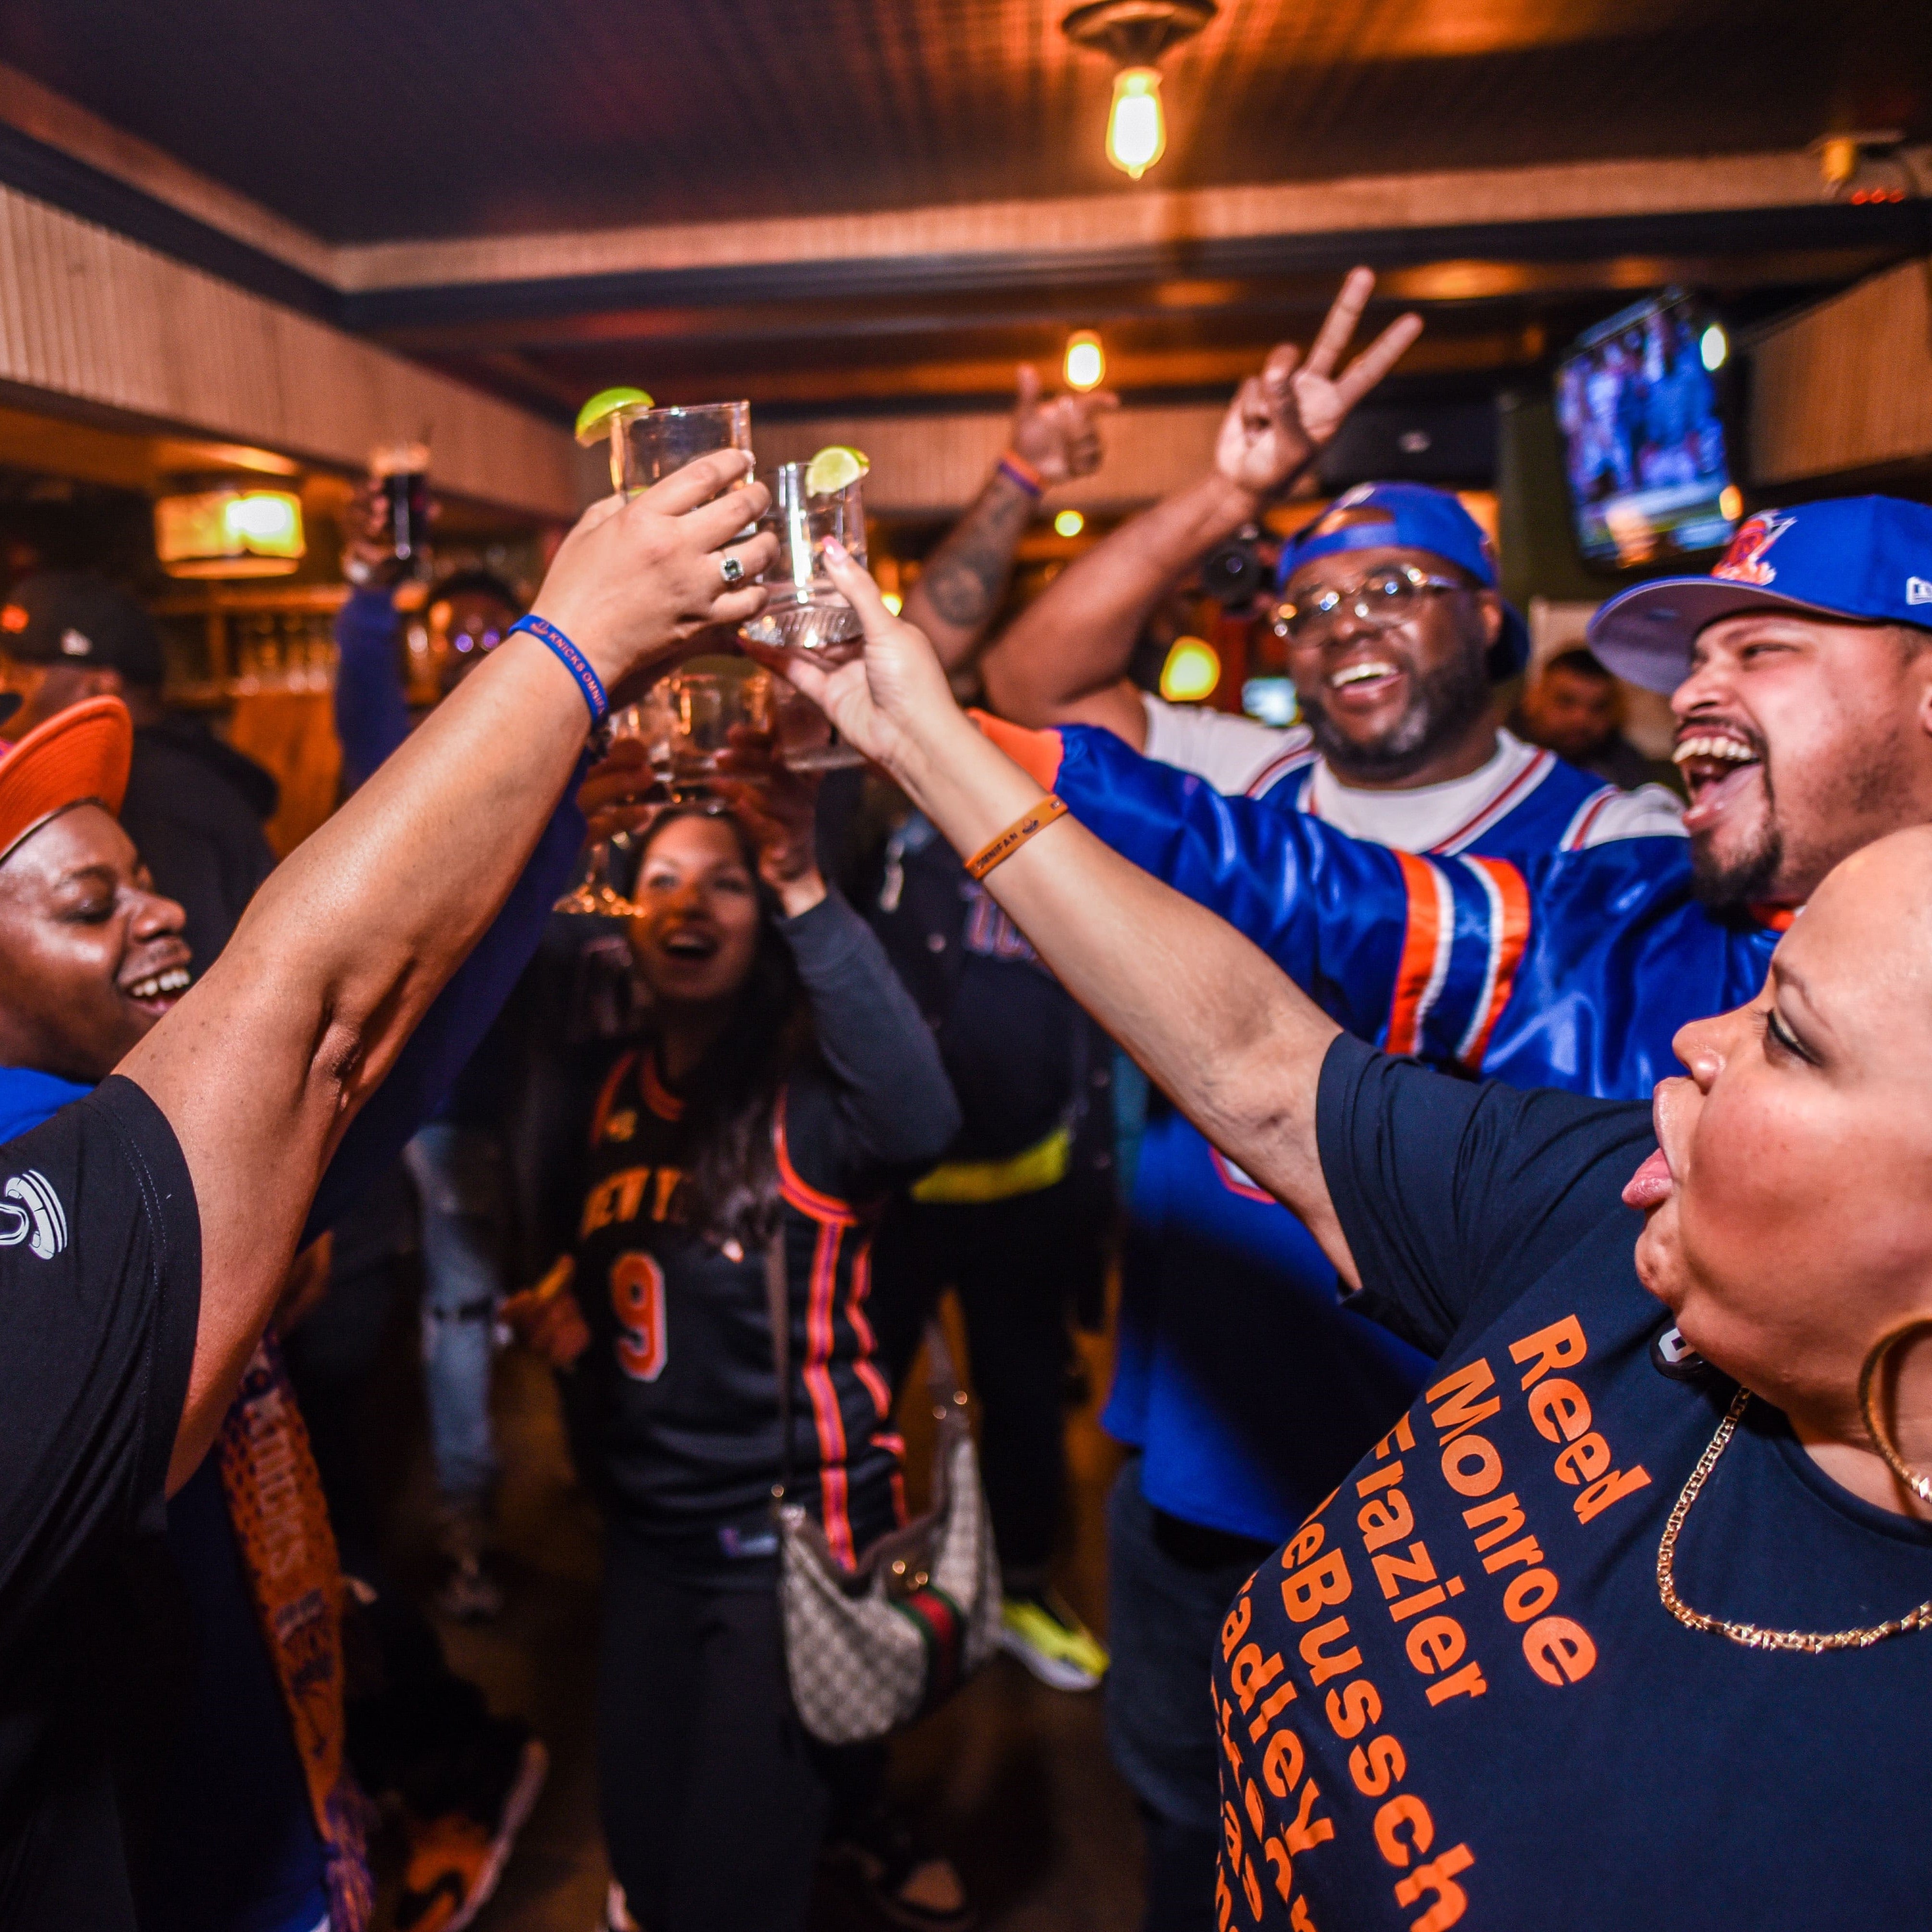 76ers vs. Knicks Game 2 Playoffs Watch Party